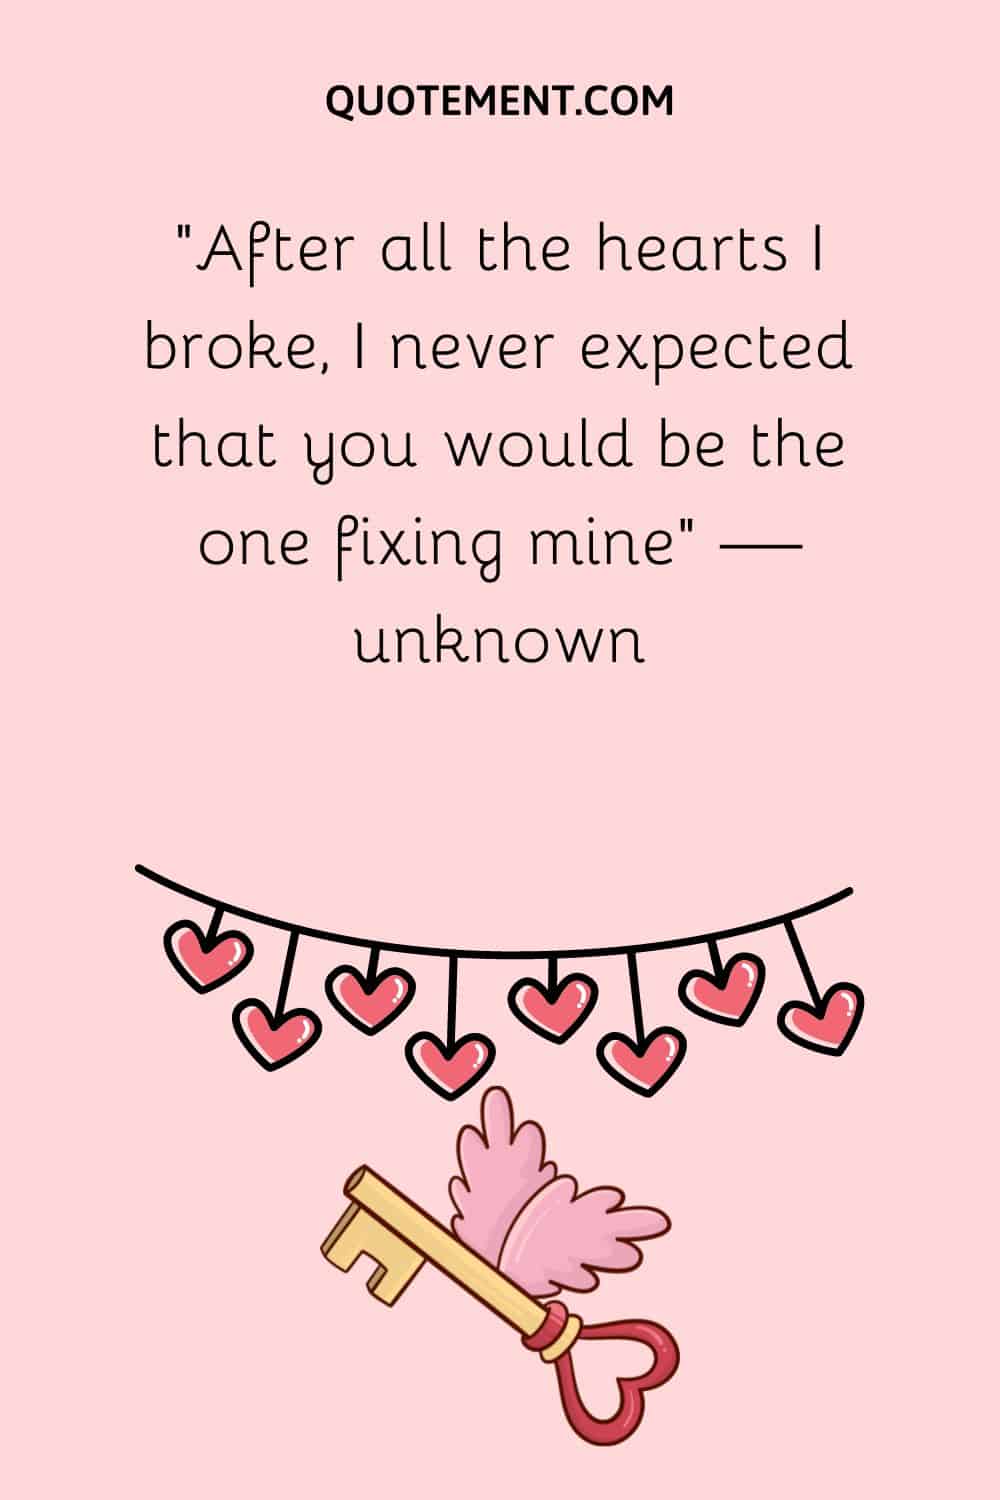 “After all the hearts I broke, I never expected that you would be the one fixing mine” — unknown